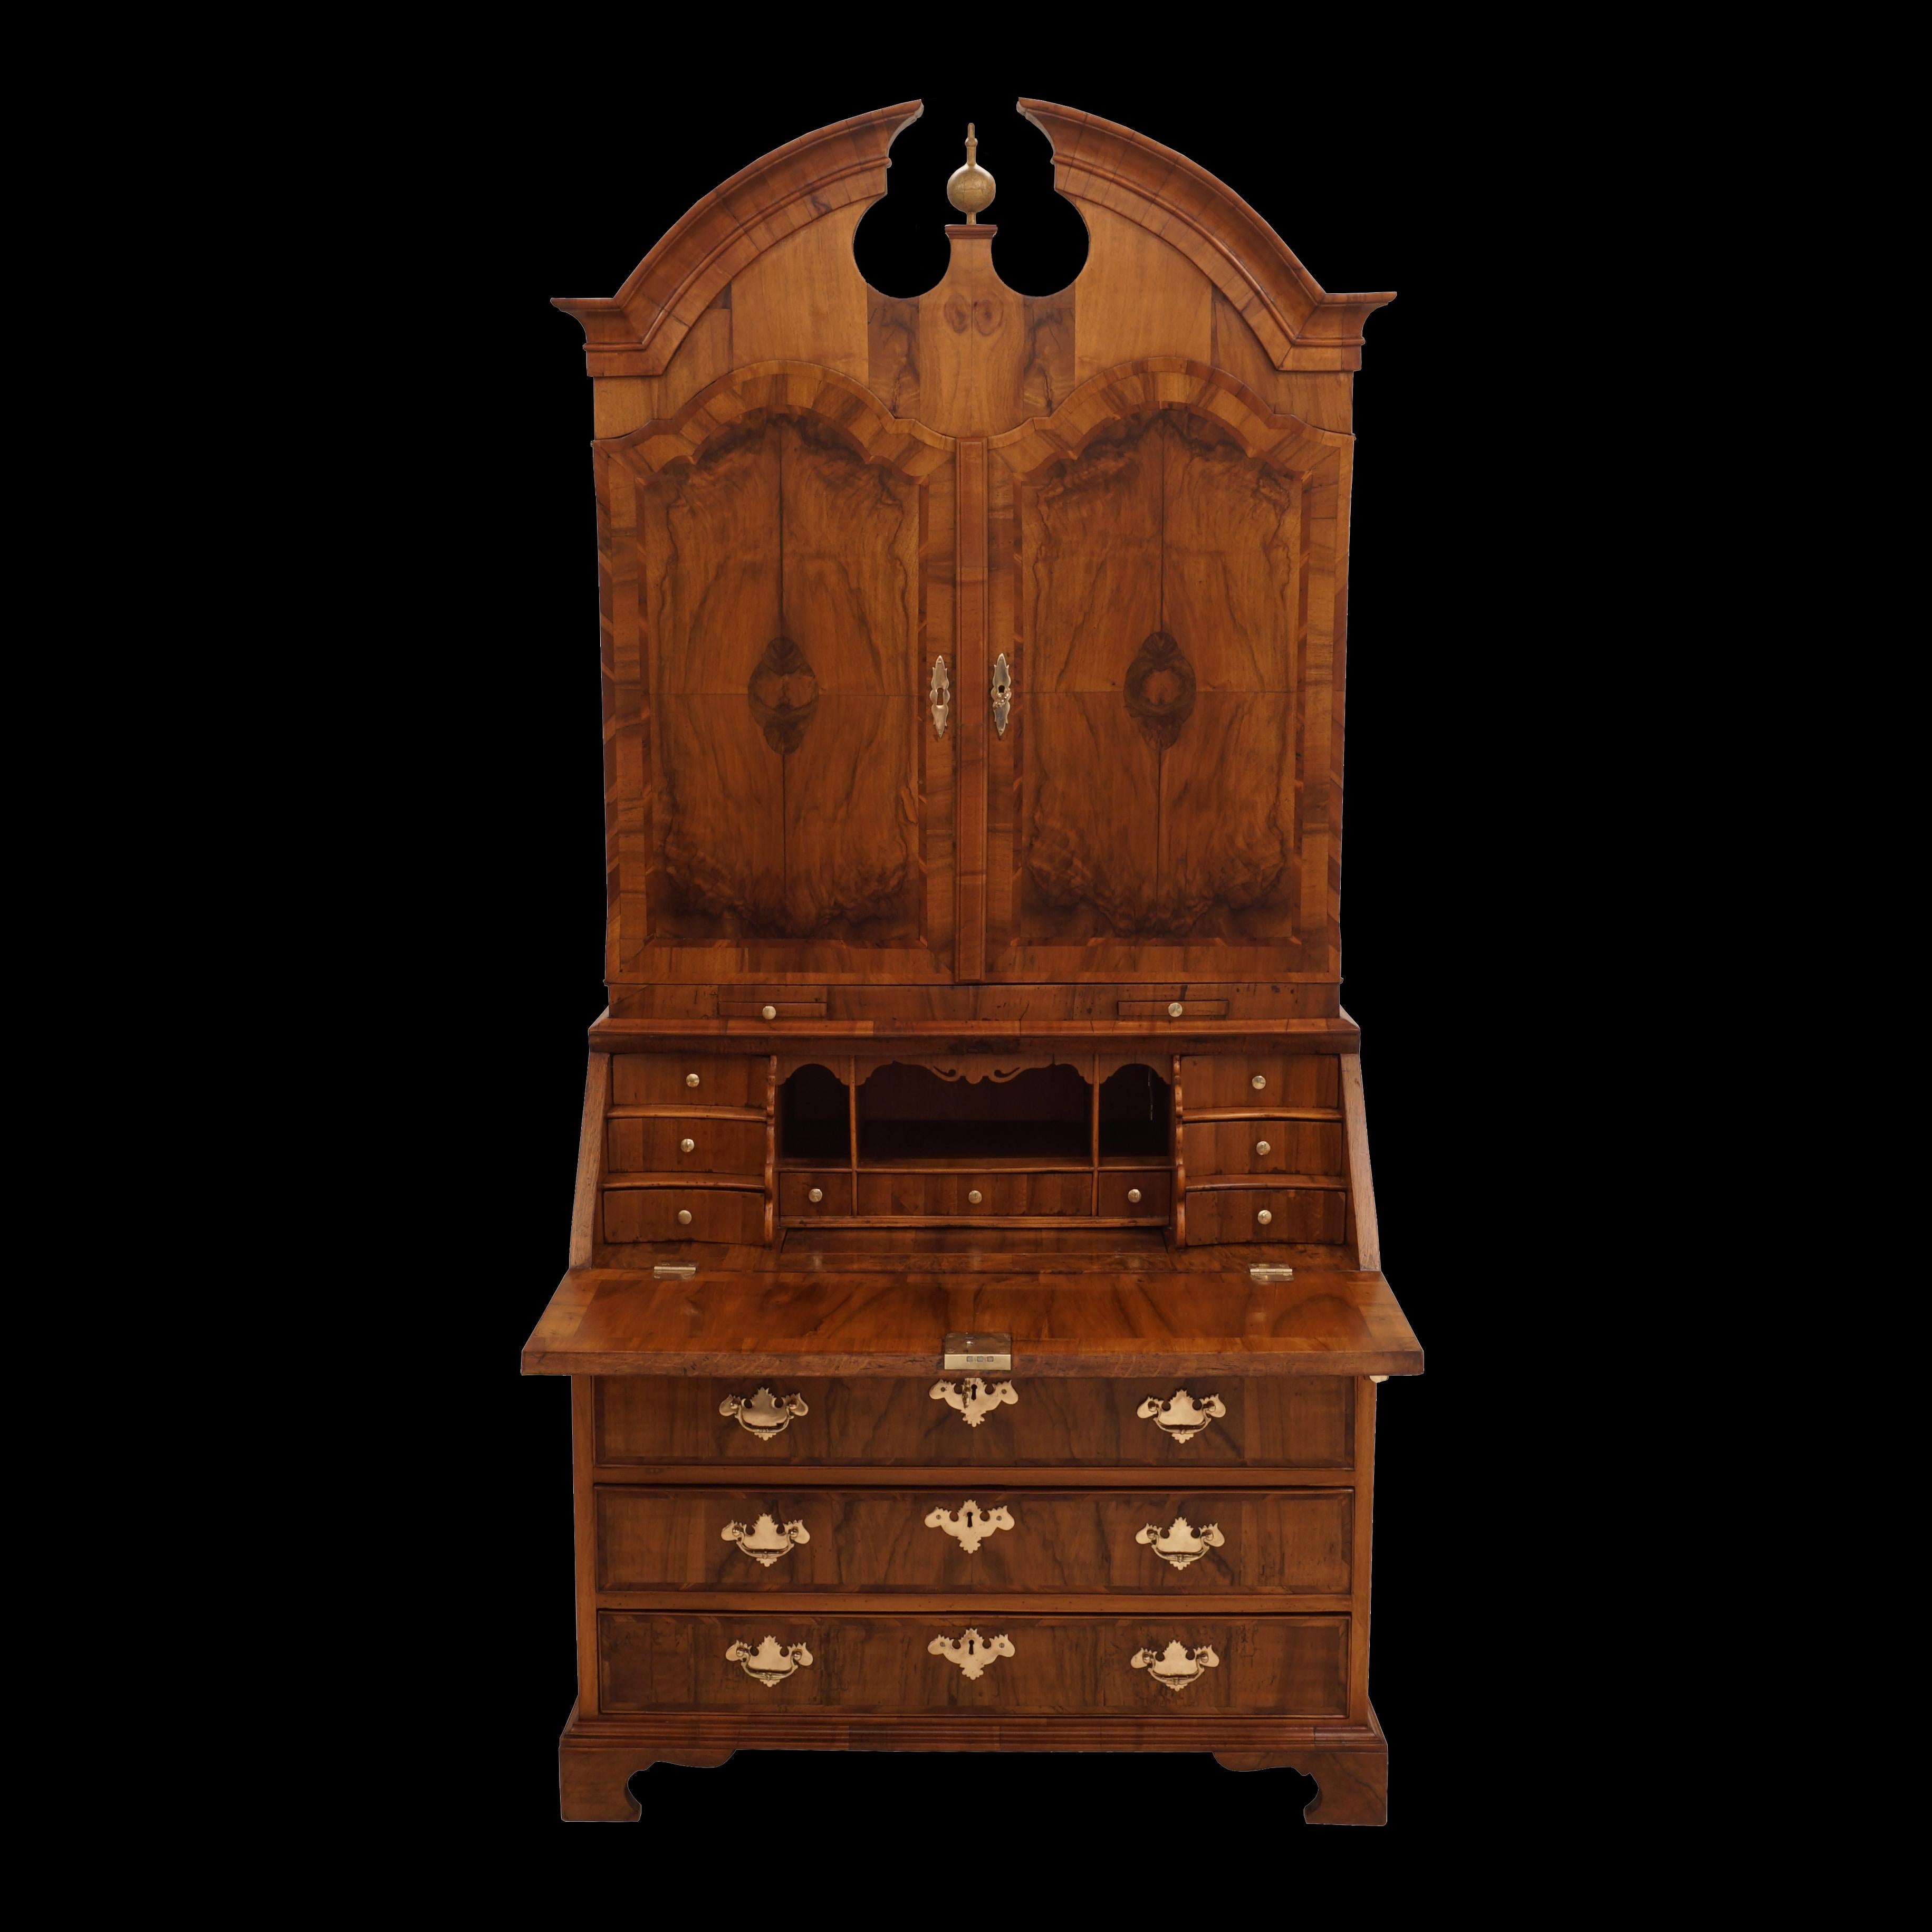 Mid 18th century baroque walnut venered Danish secretary
Upper section with two doors
Middle section with small drawers and a large hidden storage room for documents
Between the upper and middle sections plates for candle sticks
Lower section